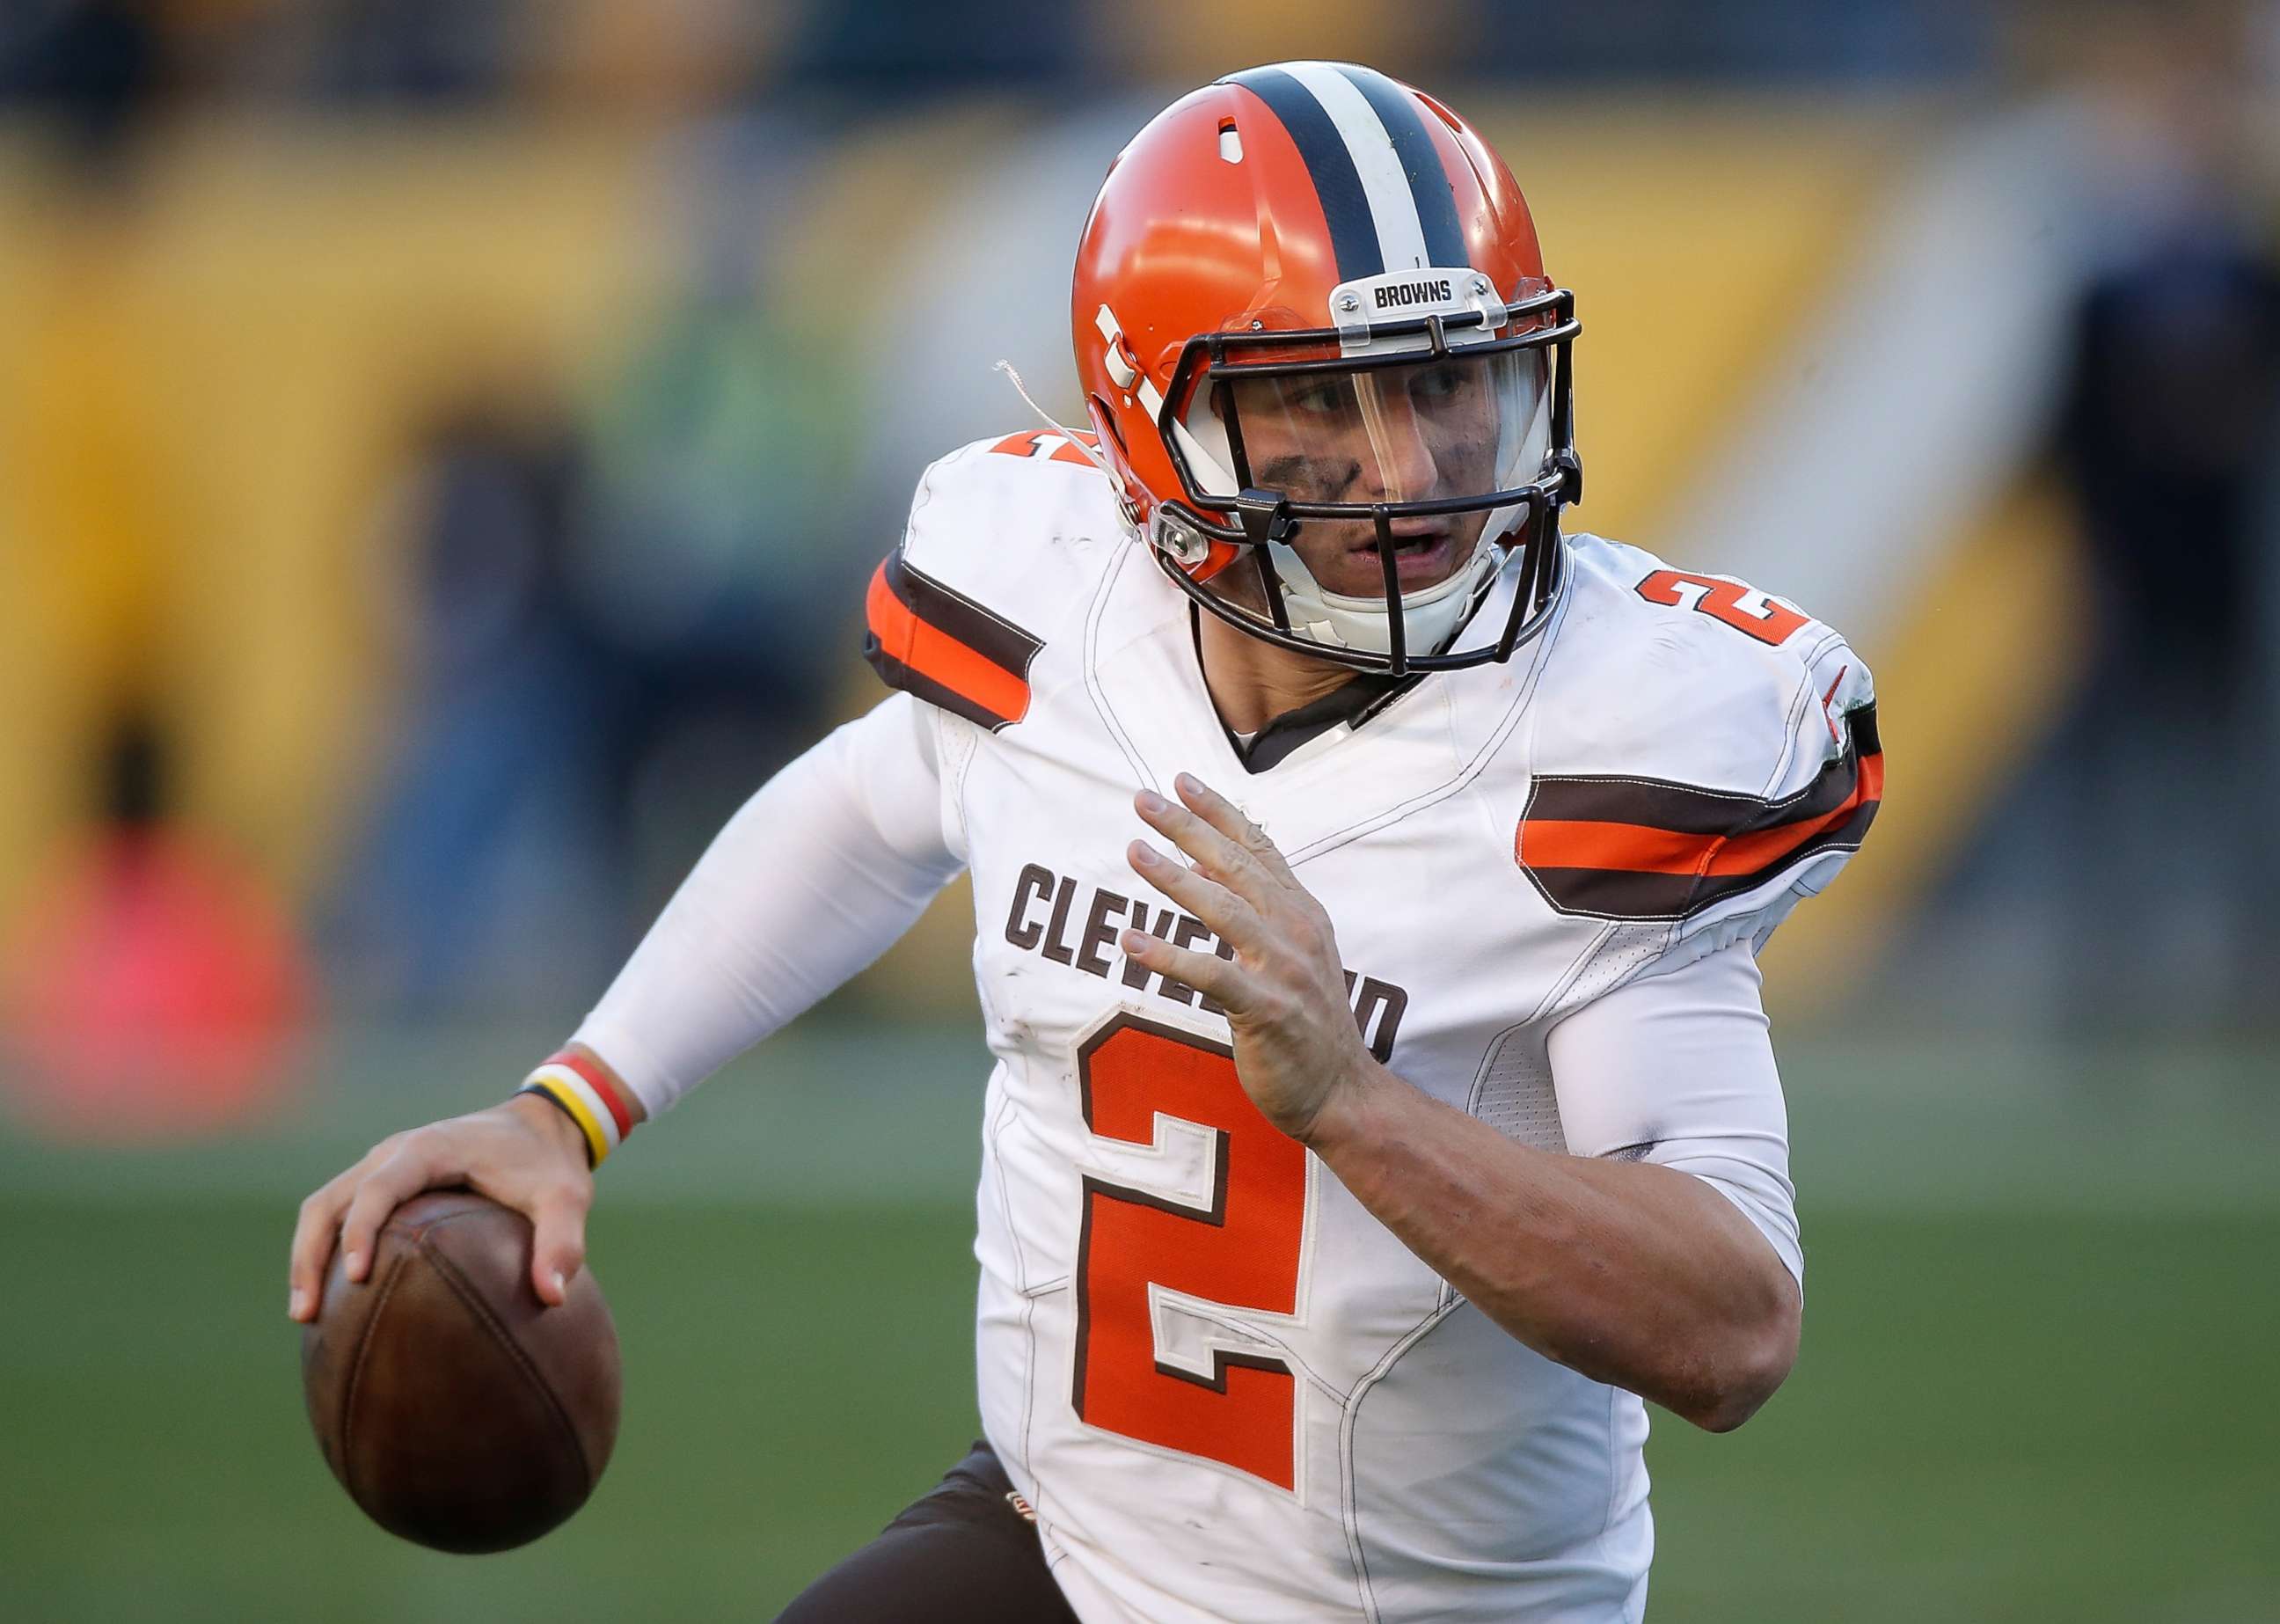 PHOTO: Johnny Manziel of the Cleveland Browns plays against the Pittsburgh Steelers at Heinz Field in this Nov. 15, 2015 file photo in Pittsburgh.